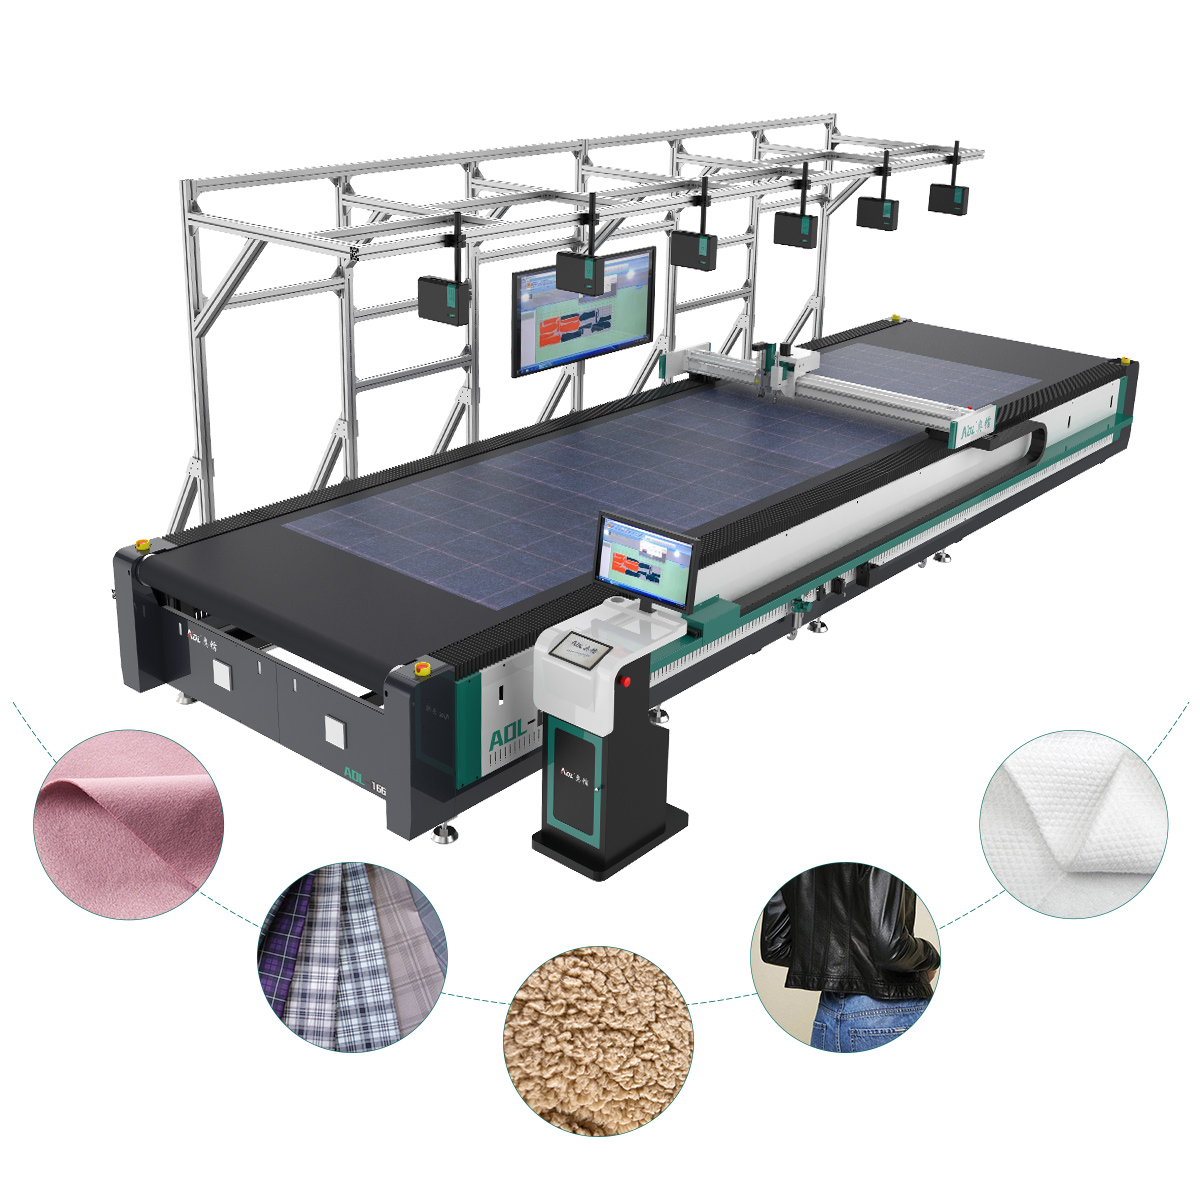 Where is the automatic clothing cutting machine better than manual cutting?